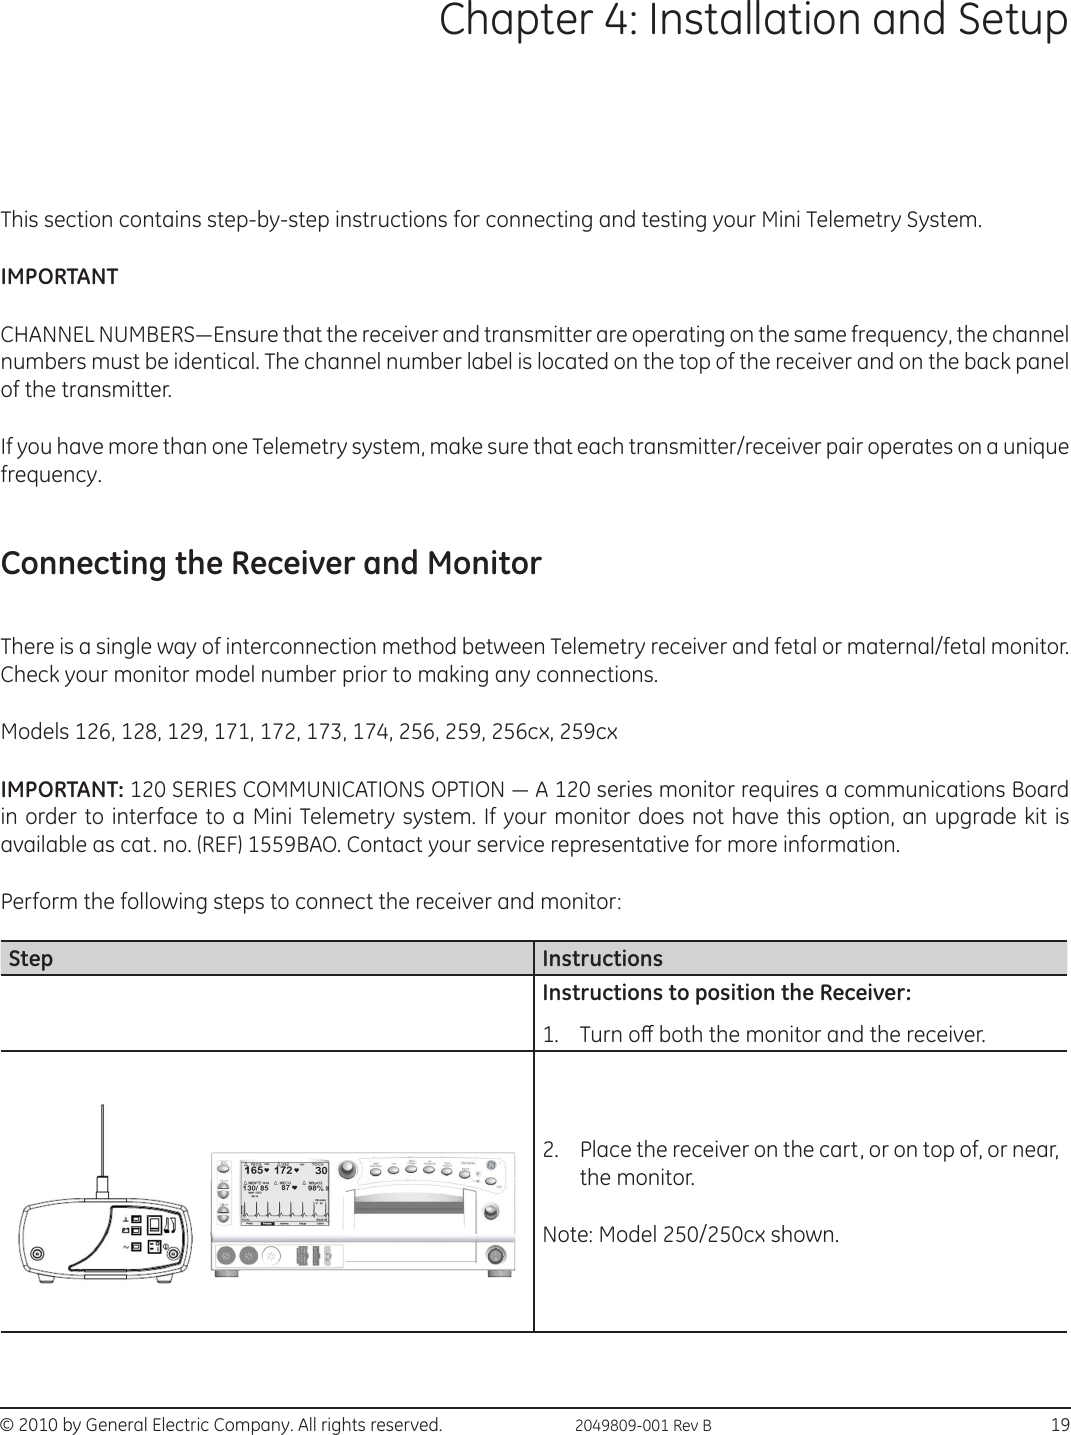 © 2010 by General Electric Company. All rights reserved.  2049809-001 Rev B                                                                              19Chapter 4: Installation and SetupThis section contains step-by-step instructions for connecting and testing your Mini Telemetry System. IMPORTANT CHANNEL NUMBERS—Ensure that the receiver and transmitter are operating on the same frequency, the channel numbers must be identical. The channel number label is located on the top of the receiver and on the back panel of the transmitter. If you have more than one Telemetry system, make sure that each transmitter/receiver pair operates on a unique frequency.Connecting the Receiver and Monitor There is a single way of interconnection method between Telemetry receiver and fetal or maternal/fetal monitor. Check your monitor model number prior to making any connections. Models 126, 128, 129, 171, 172, 173, 174, 256, 259, 256cx, 259cxIMPORTANT: 120 SERIES COMMUNICATIONS OPTION — A 120 series monitor requires a communications Board in order to interface to a Mini Telemetry system. If your monitor does not have this option, an upgrade kit is available as cat. no. (REF) 1559BAO. Contact your service representative for more information. Perform the following steps to connect the receiver and monitor:Step InstructionsInstructions to position the Receiver:1.  Turn o both the monitor and the receiver.2.  Place the receiver on the cart, or on top of, or near, the monitor.Note: Model 250/250cx shown.